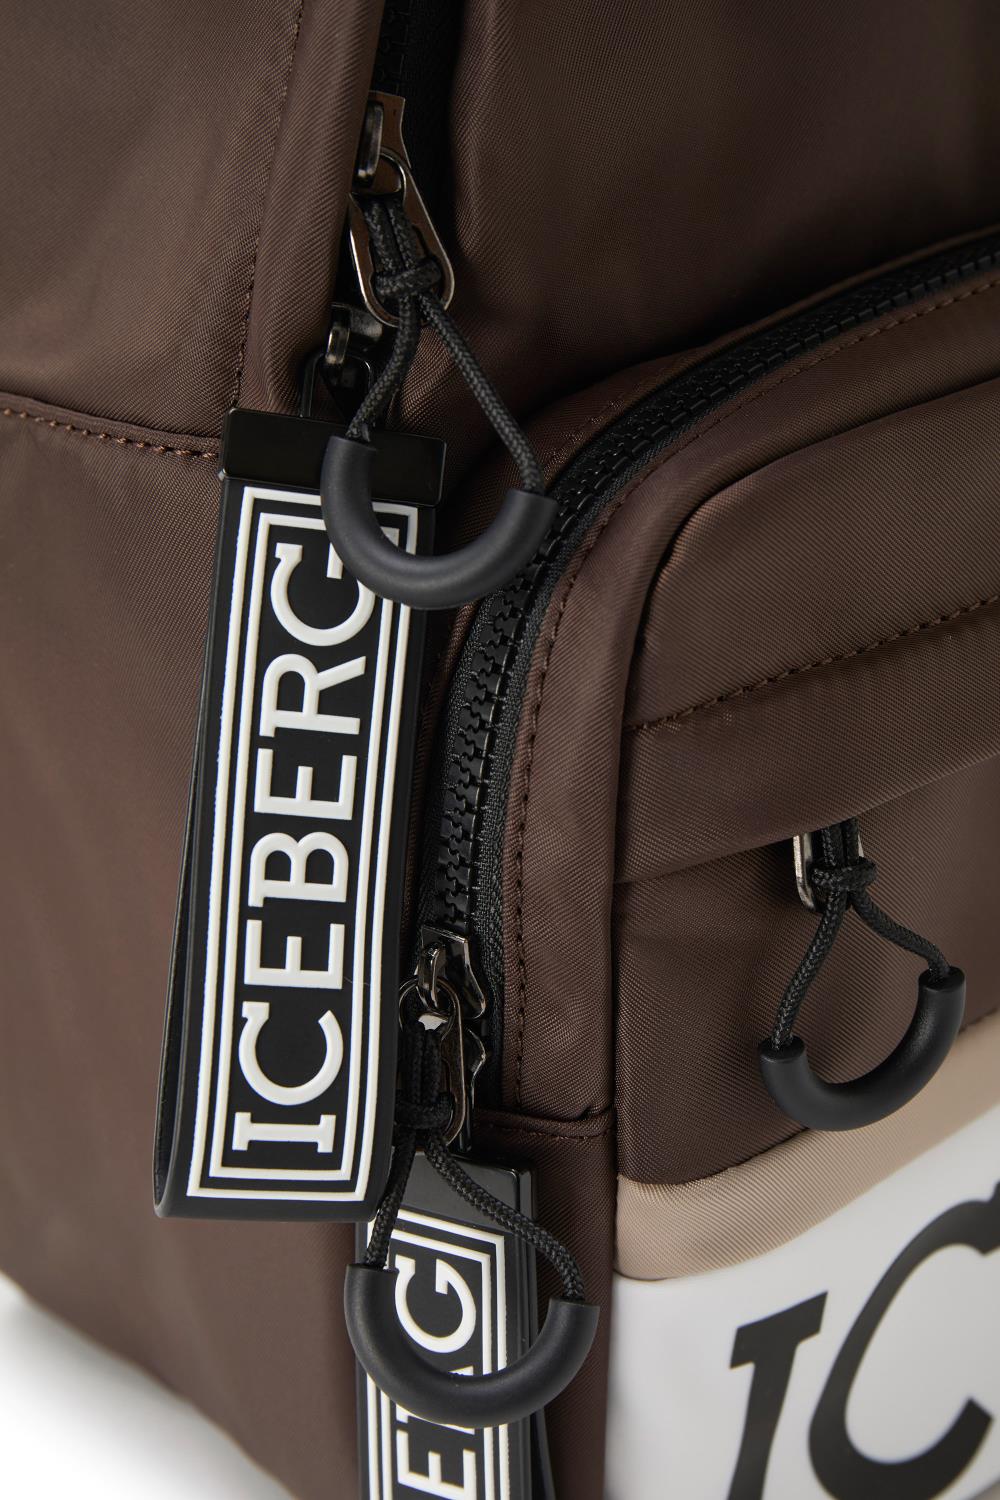 Backpack with institutional logo - Iceberg - Official Website